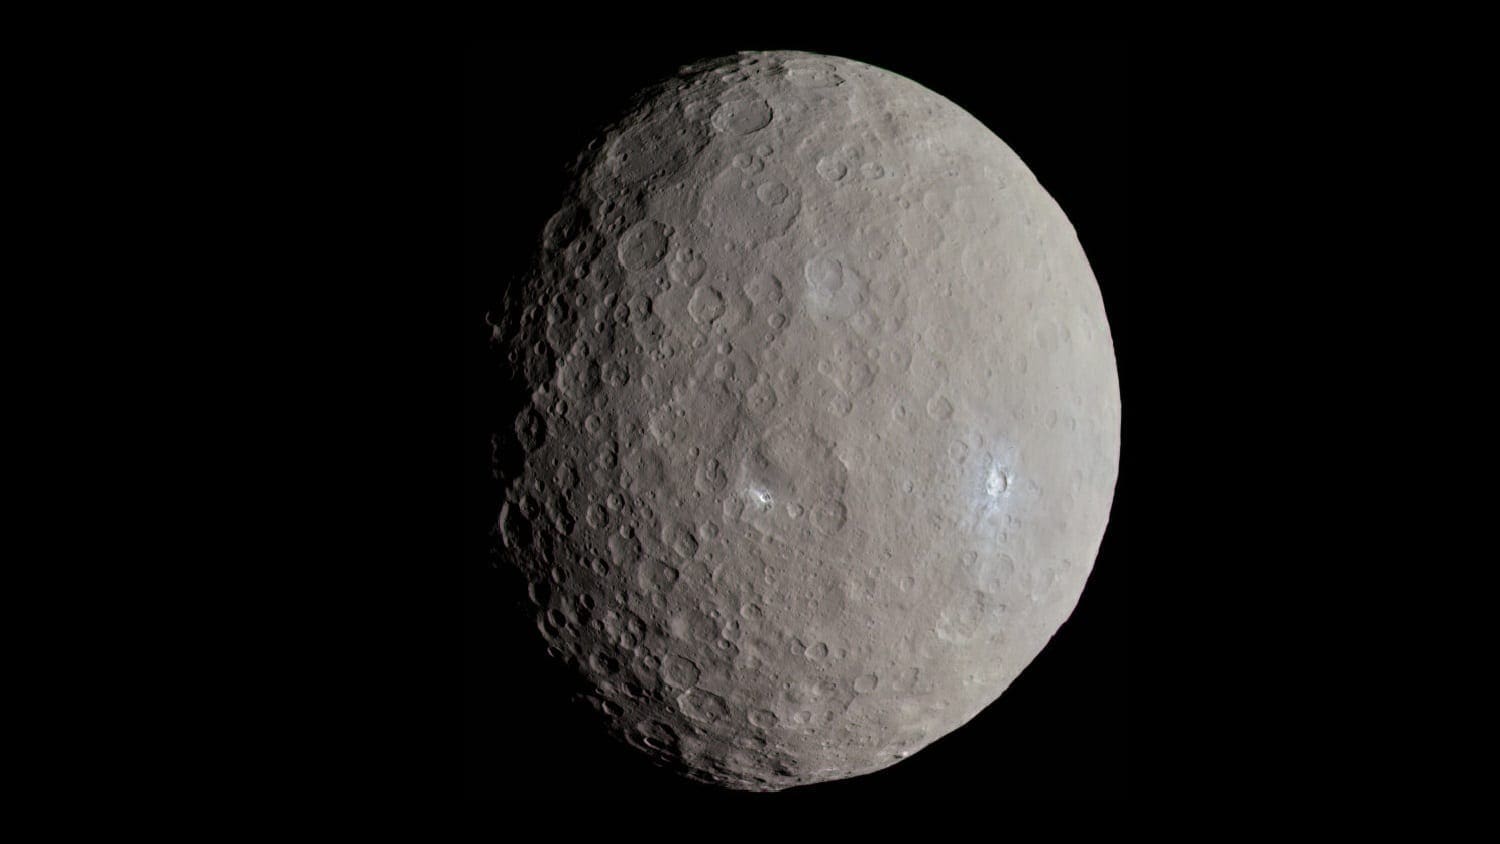 Ceres from the Dawn spacecraft